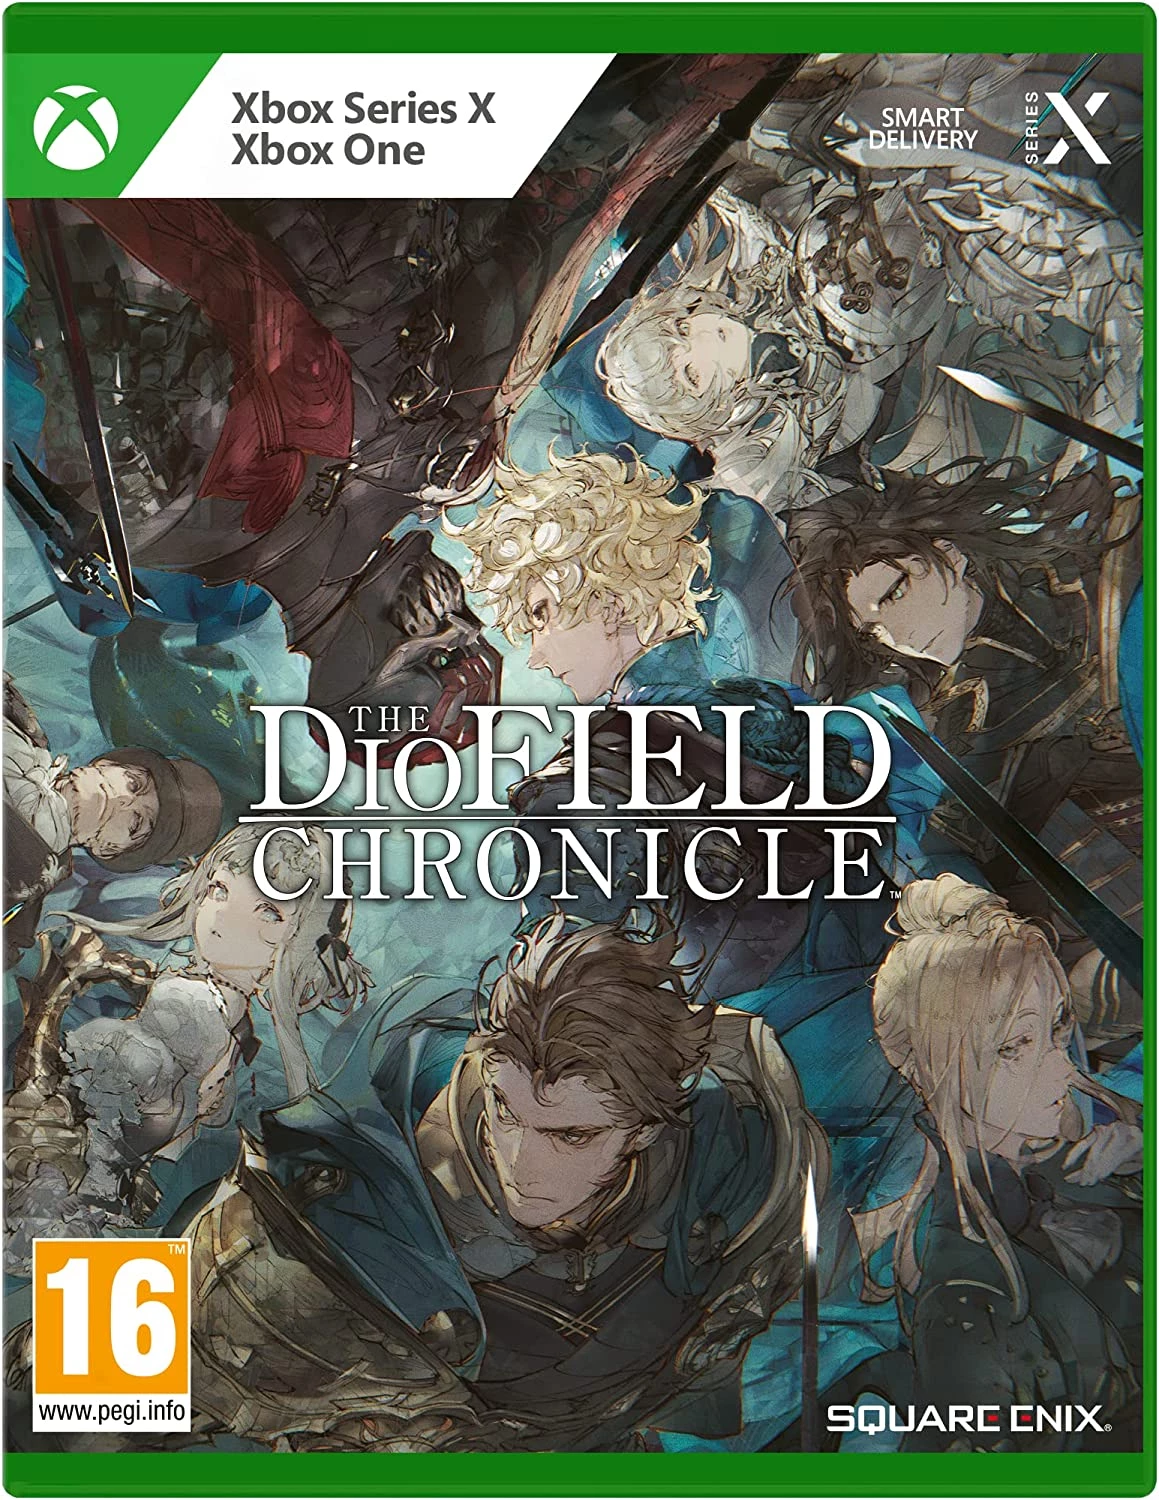 The Diofield Chronicle (Xbox Series X), Square Enix